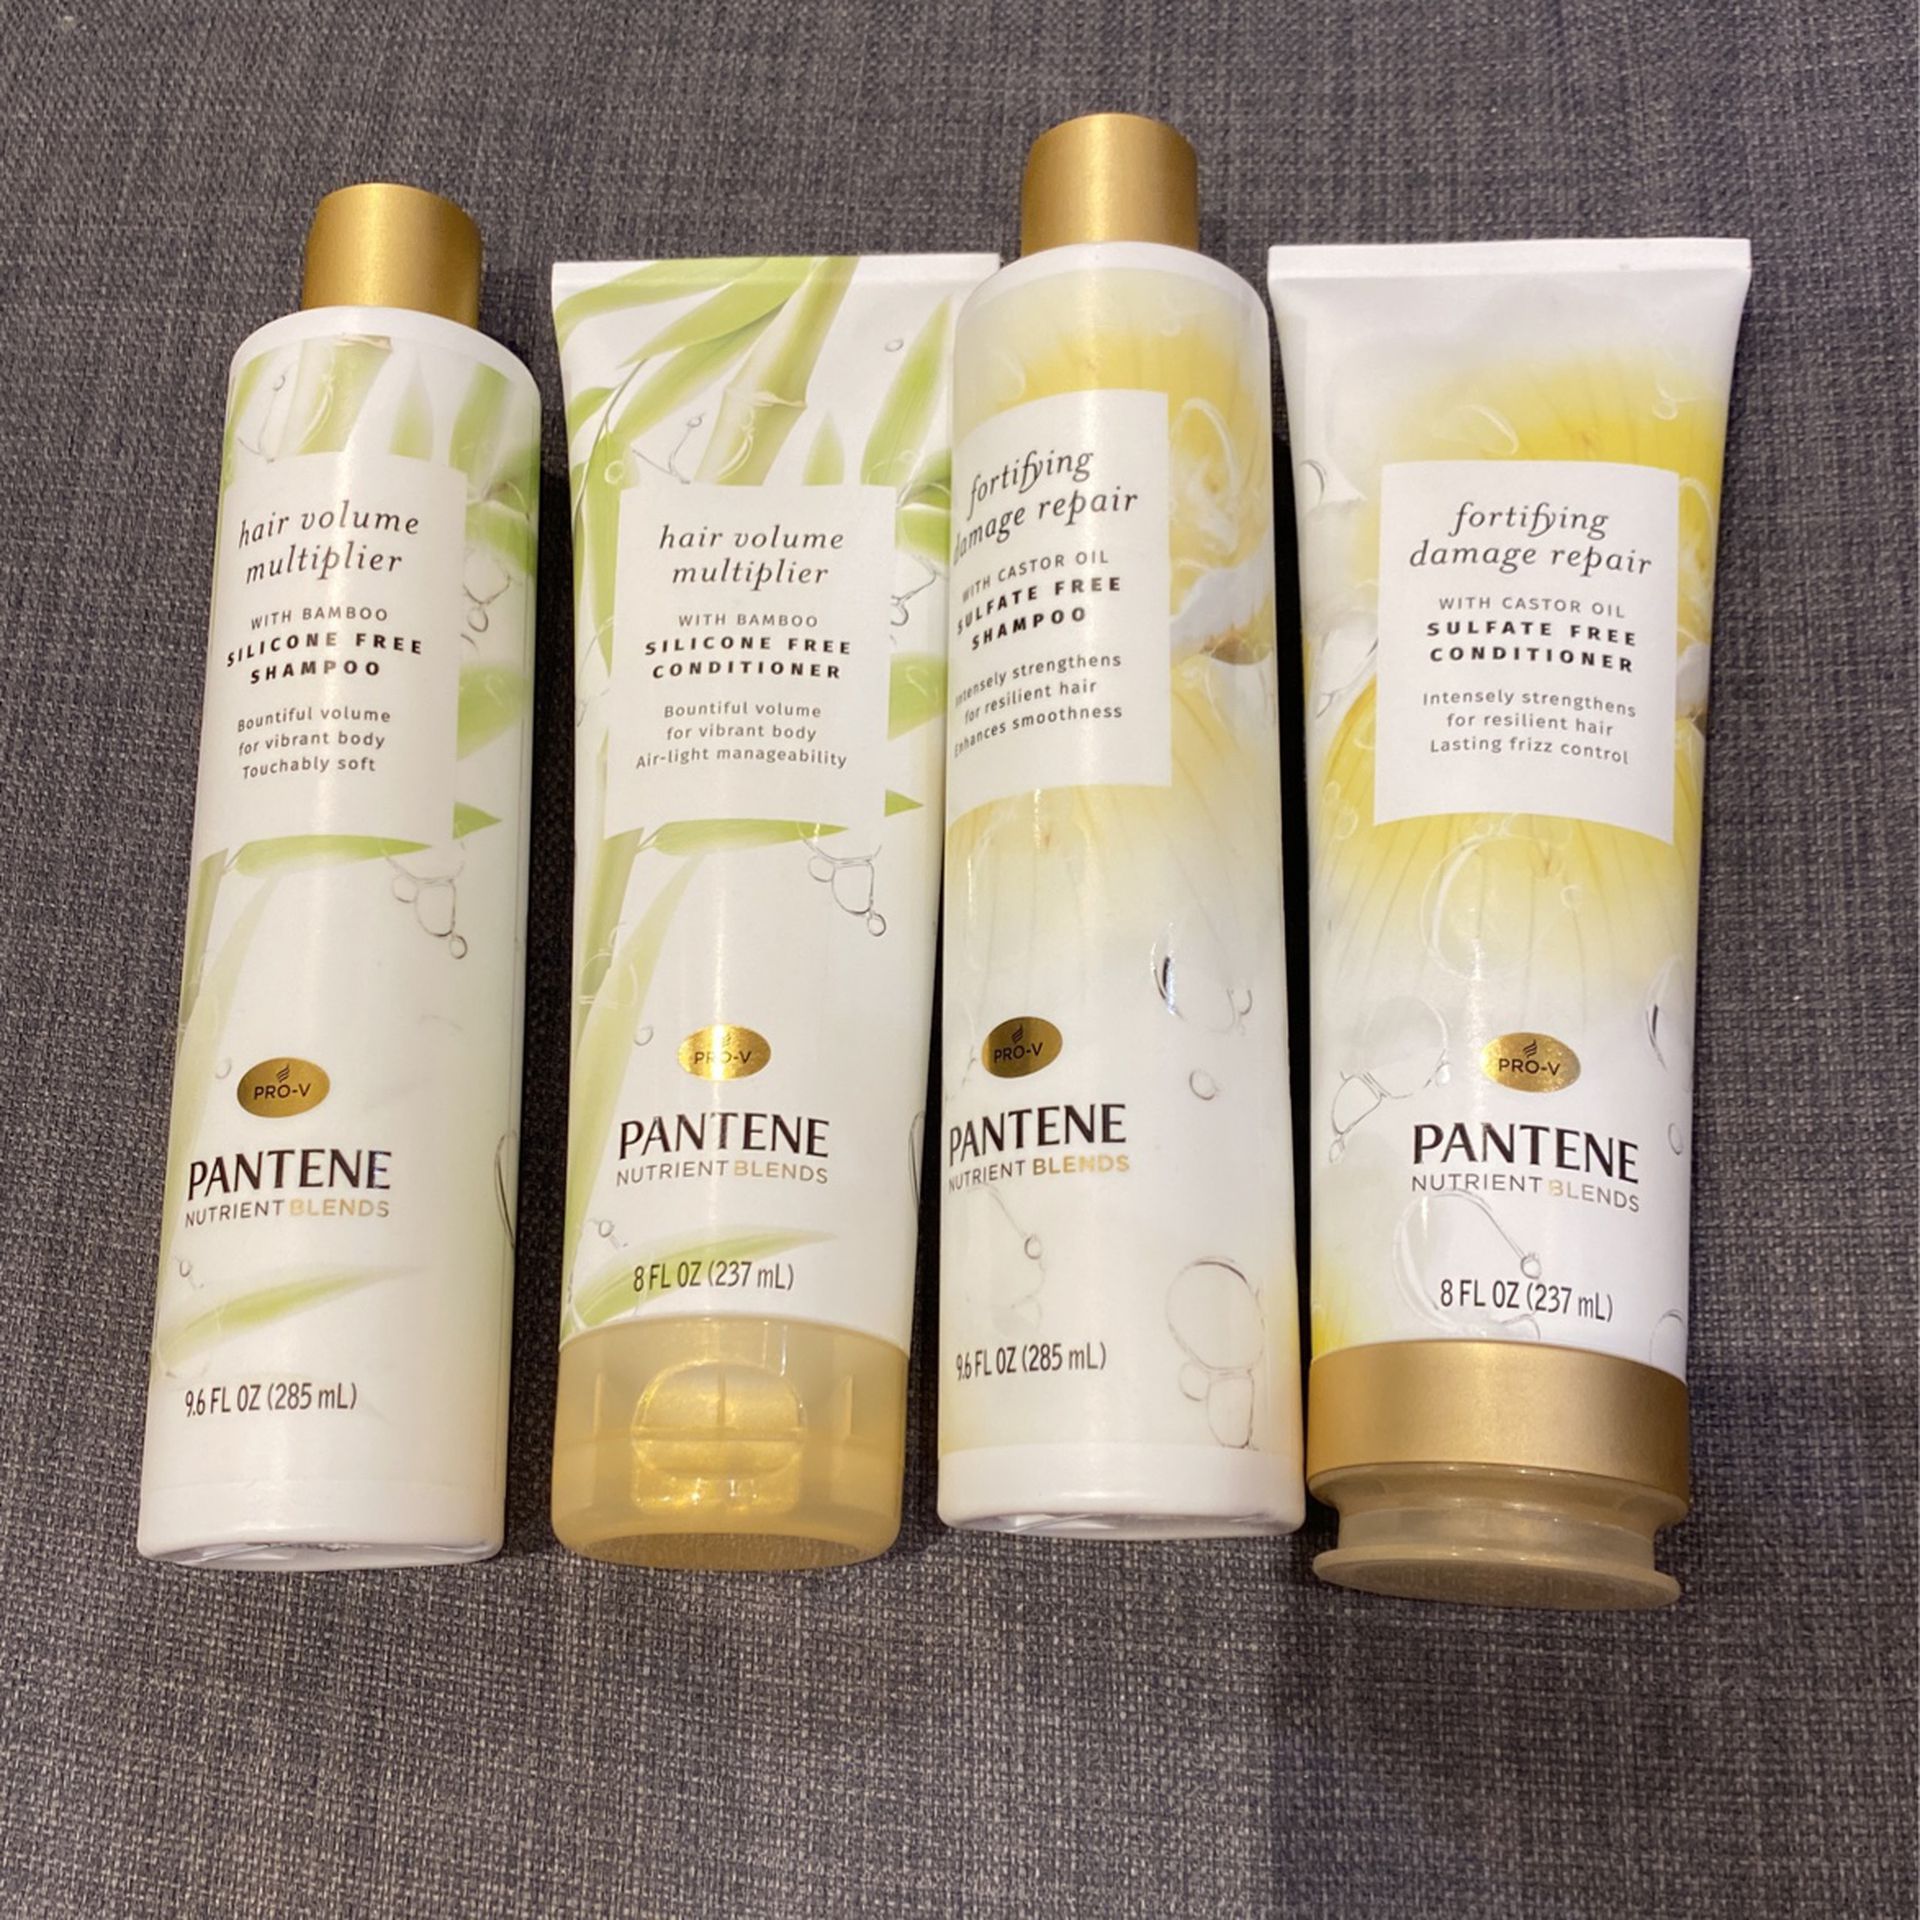 Pantene Nutrient Blends Shampoo And Conditioner Lot Of 4 For $20